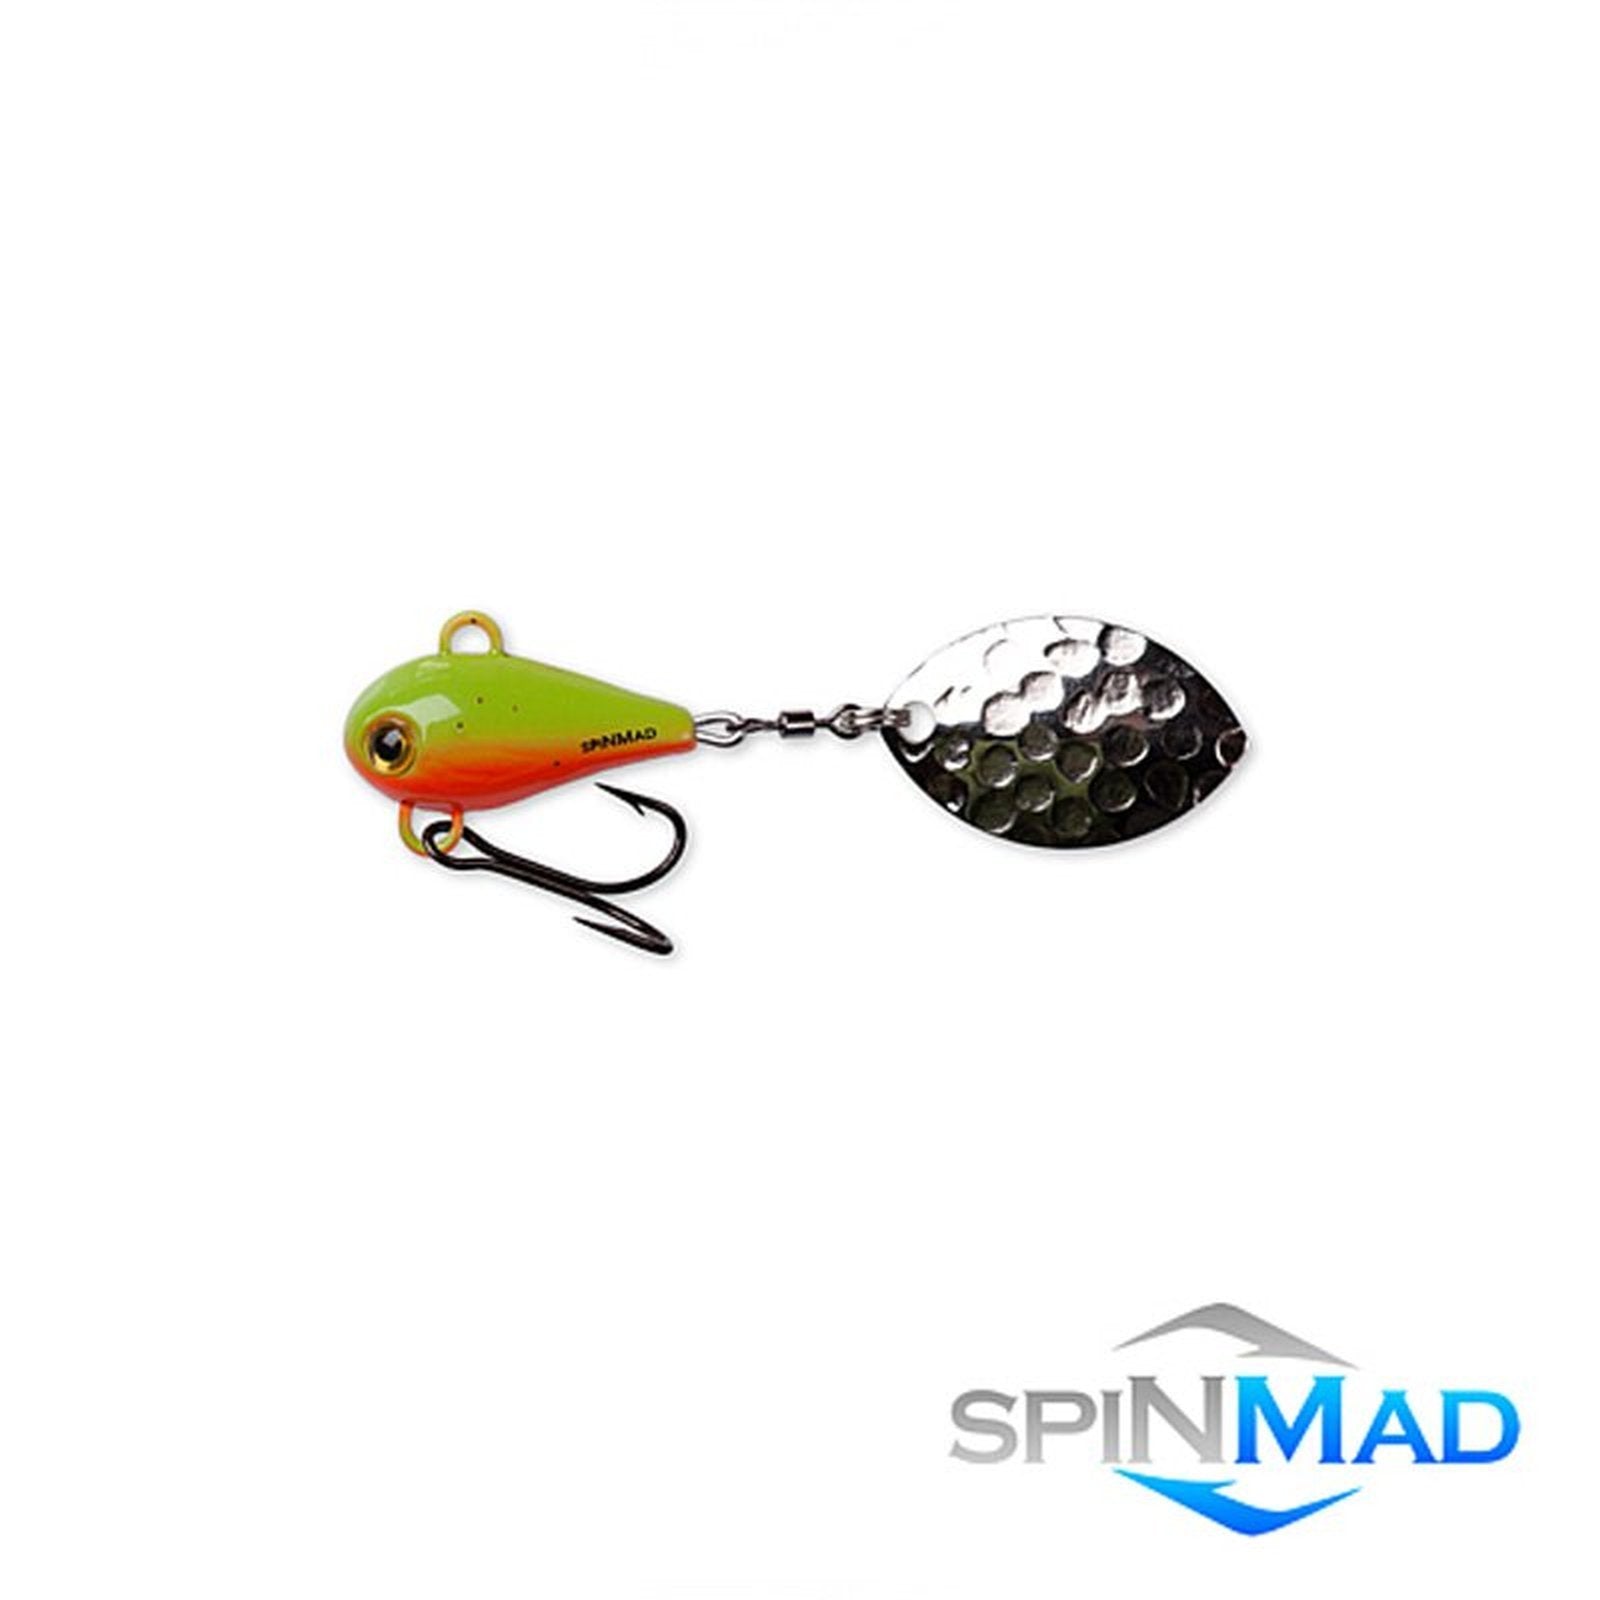 SpinMad MAG 6 0707